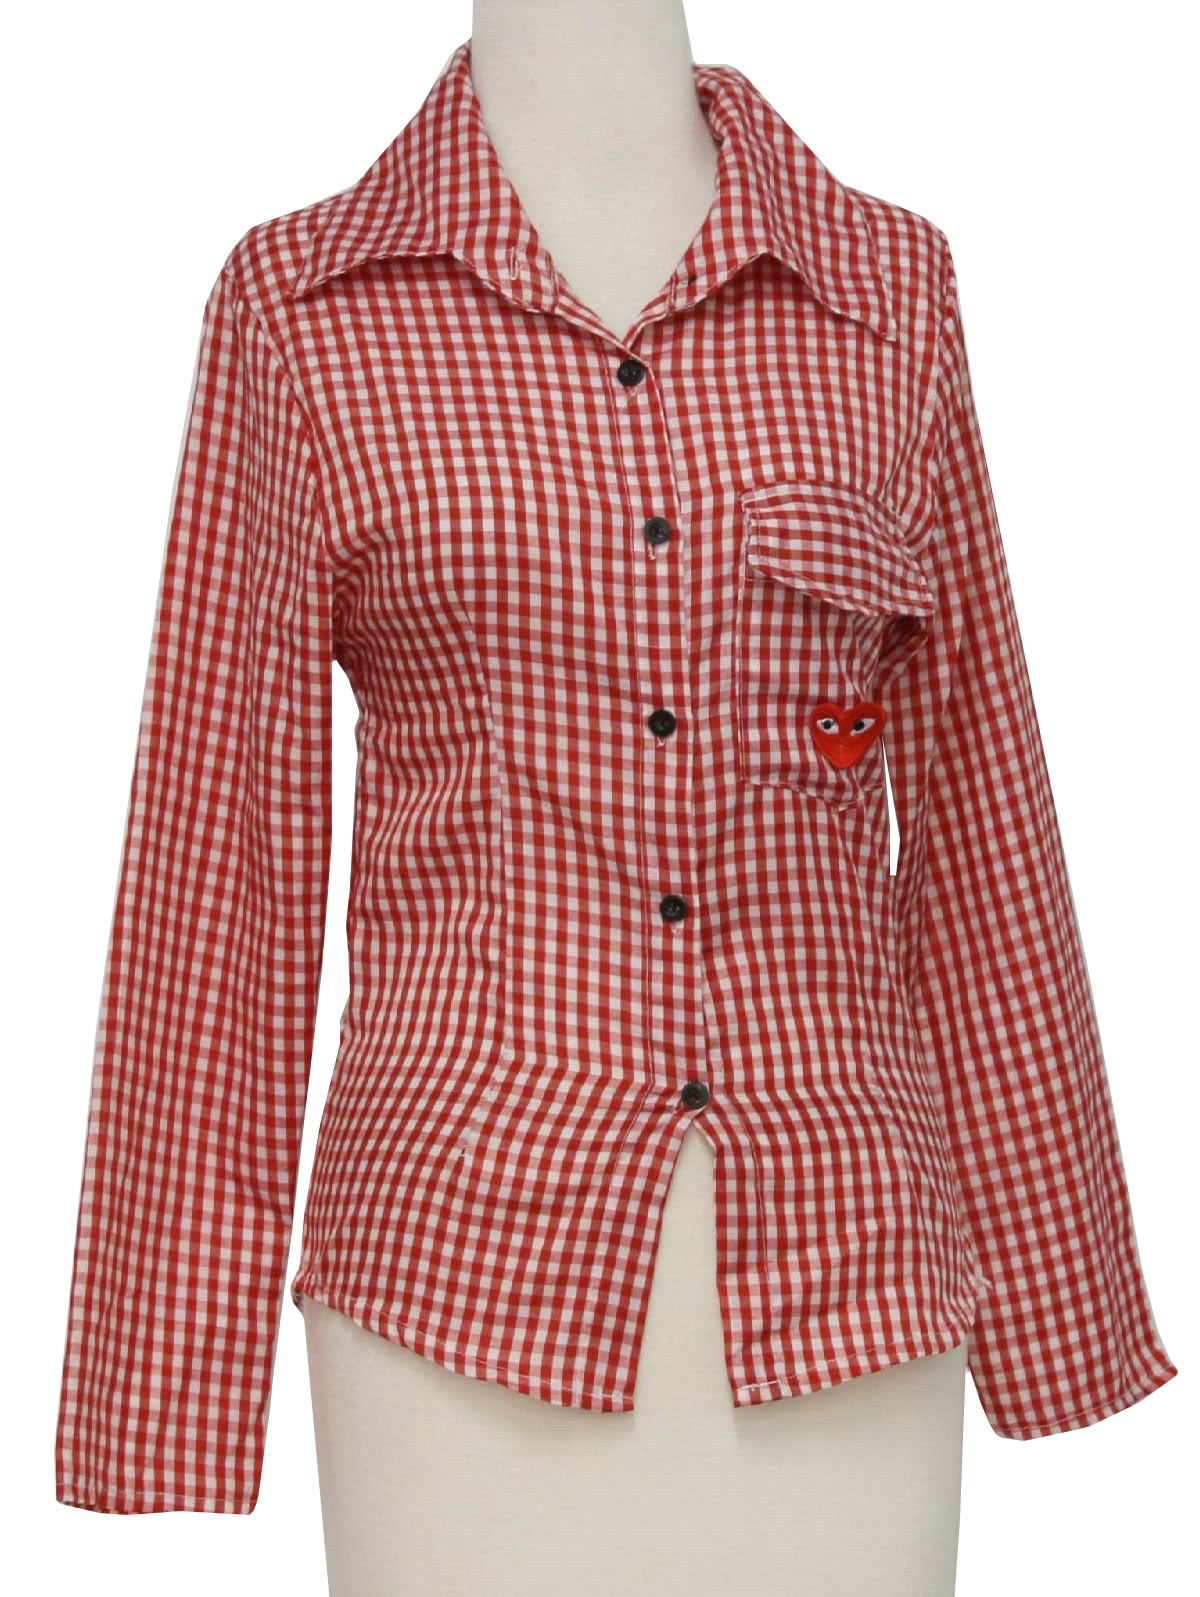 home sewn 1970s Vintage Shirt: 70s -home sewn- Girls red and white ...